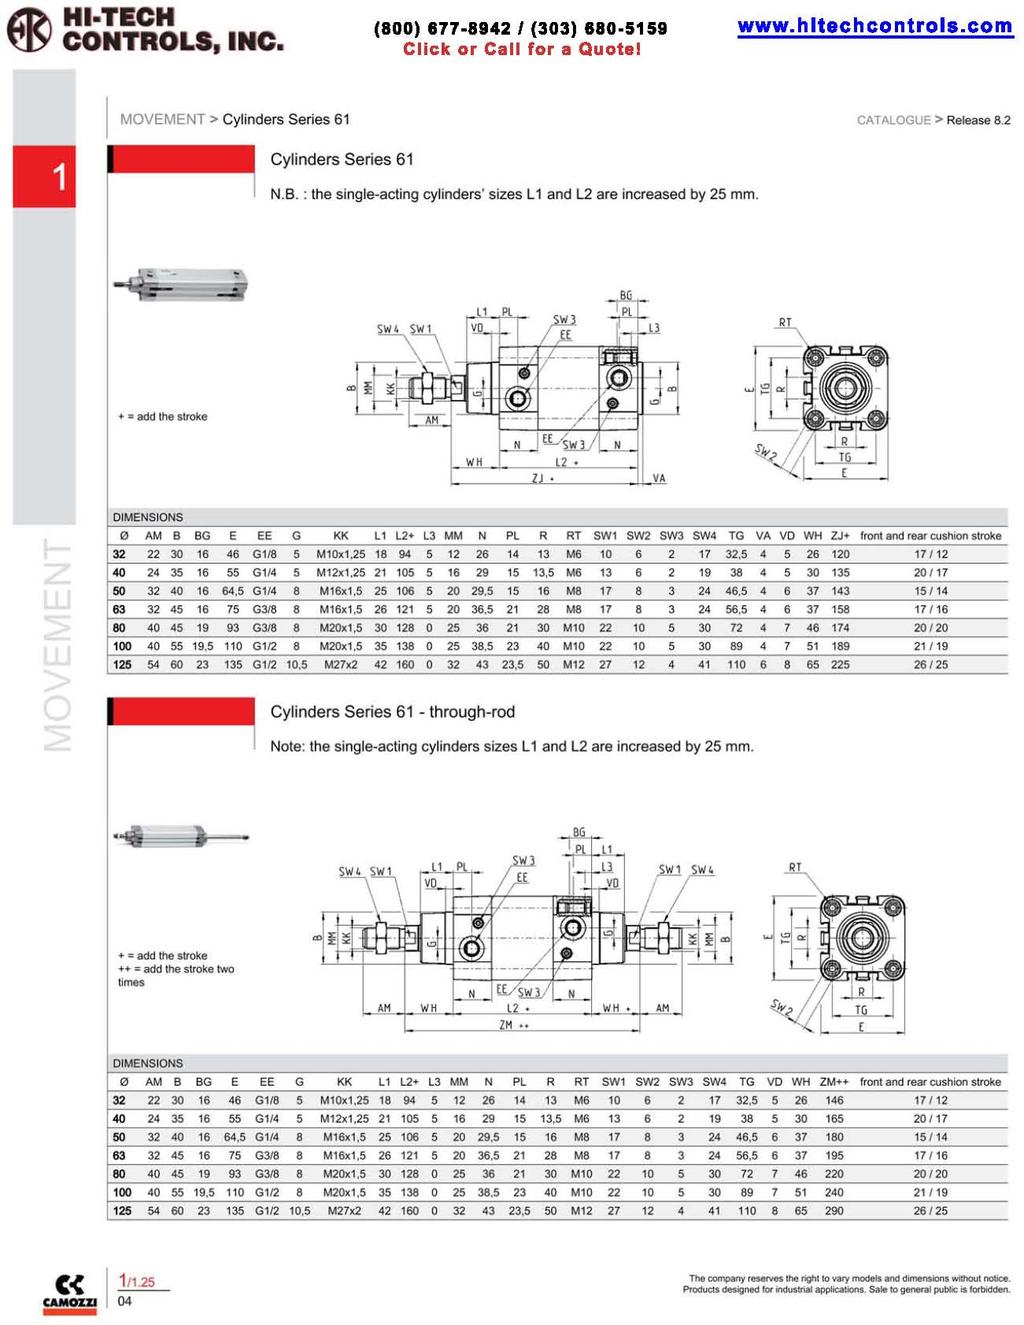 CATAlOGUE> Release 8.2 Cylinders Series 61 N.B. : the single-acting cylinders' sizes l1 and L2 are increased by 25 mm.